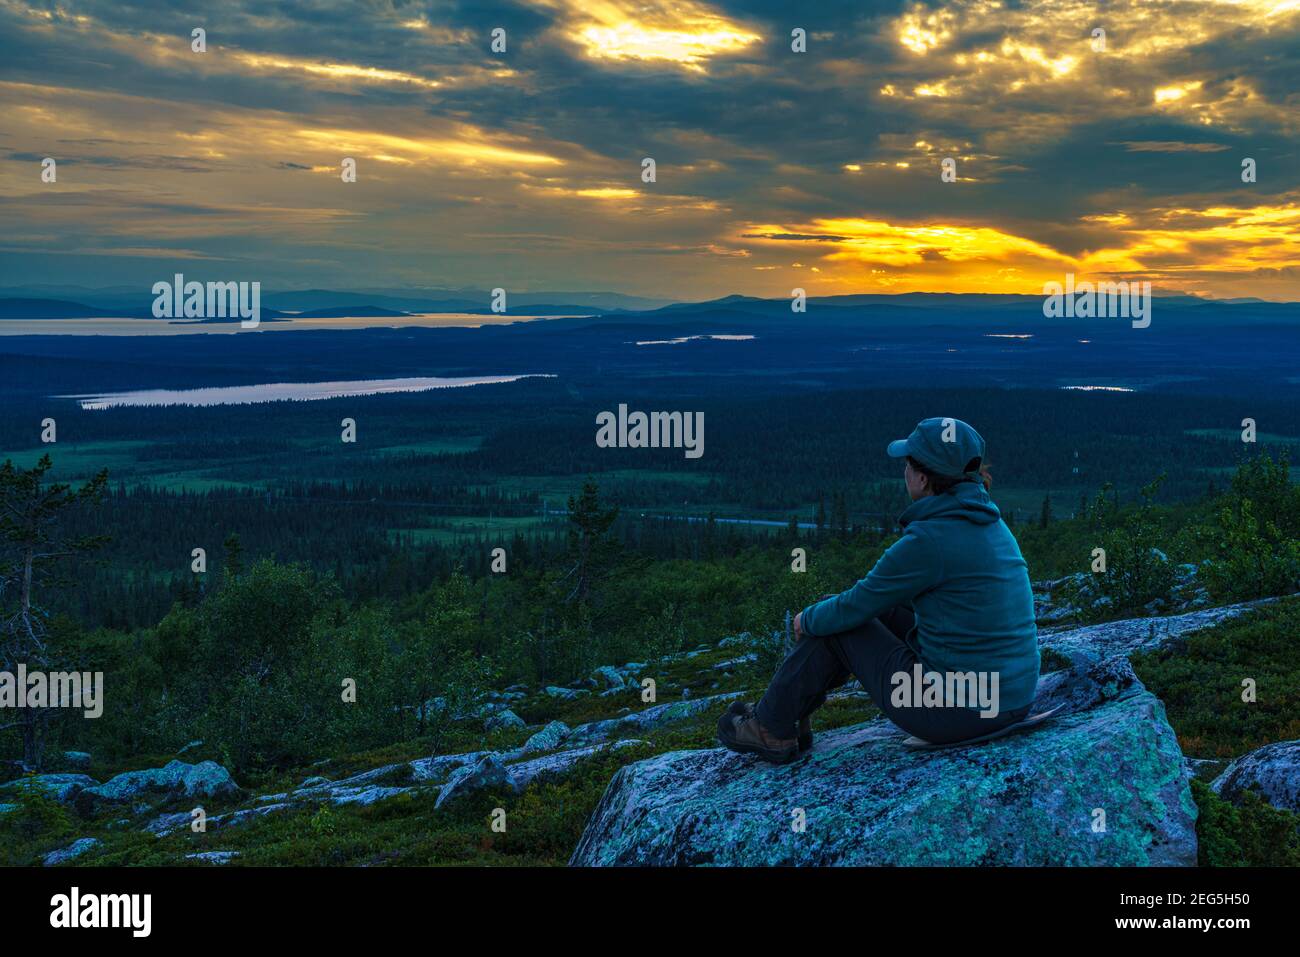 Woman enjoying the sunset, with colorfull sky and mountains in background, Gällivare county, Swedish Lapland, Sweden Stock Photo